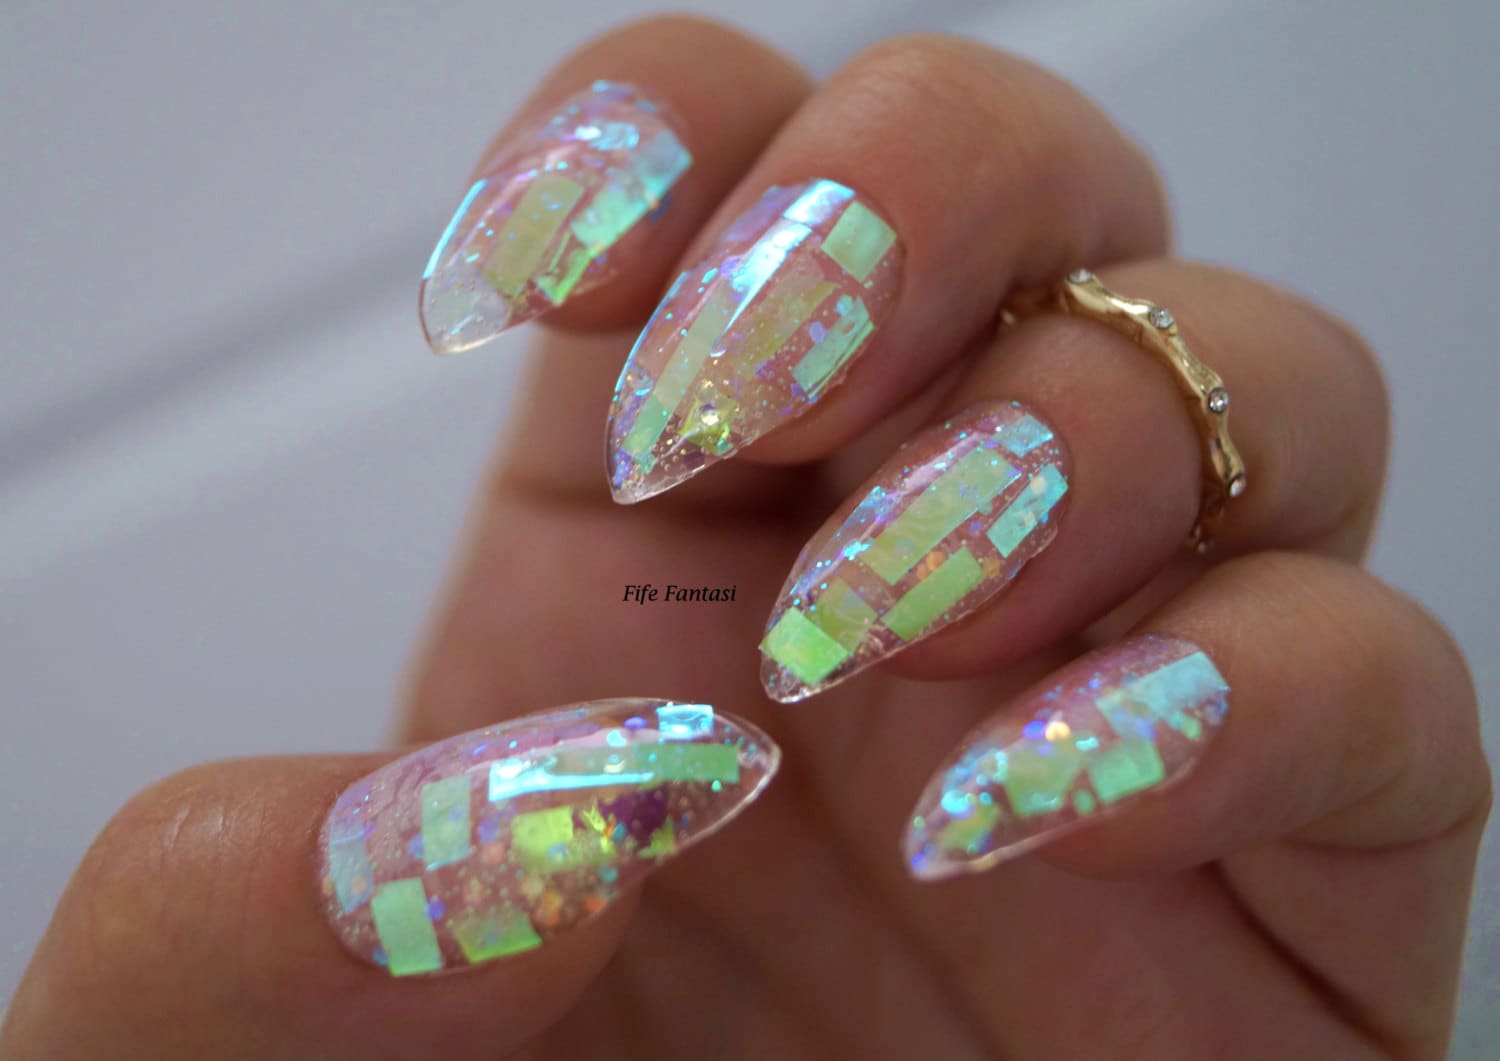 2. 10 Glass Nail Art Designs That Will Make Your Nails Shine - wide 8